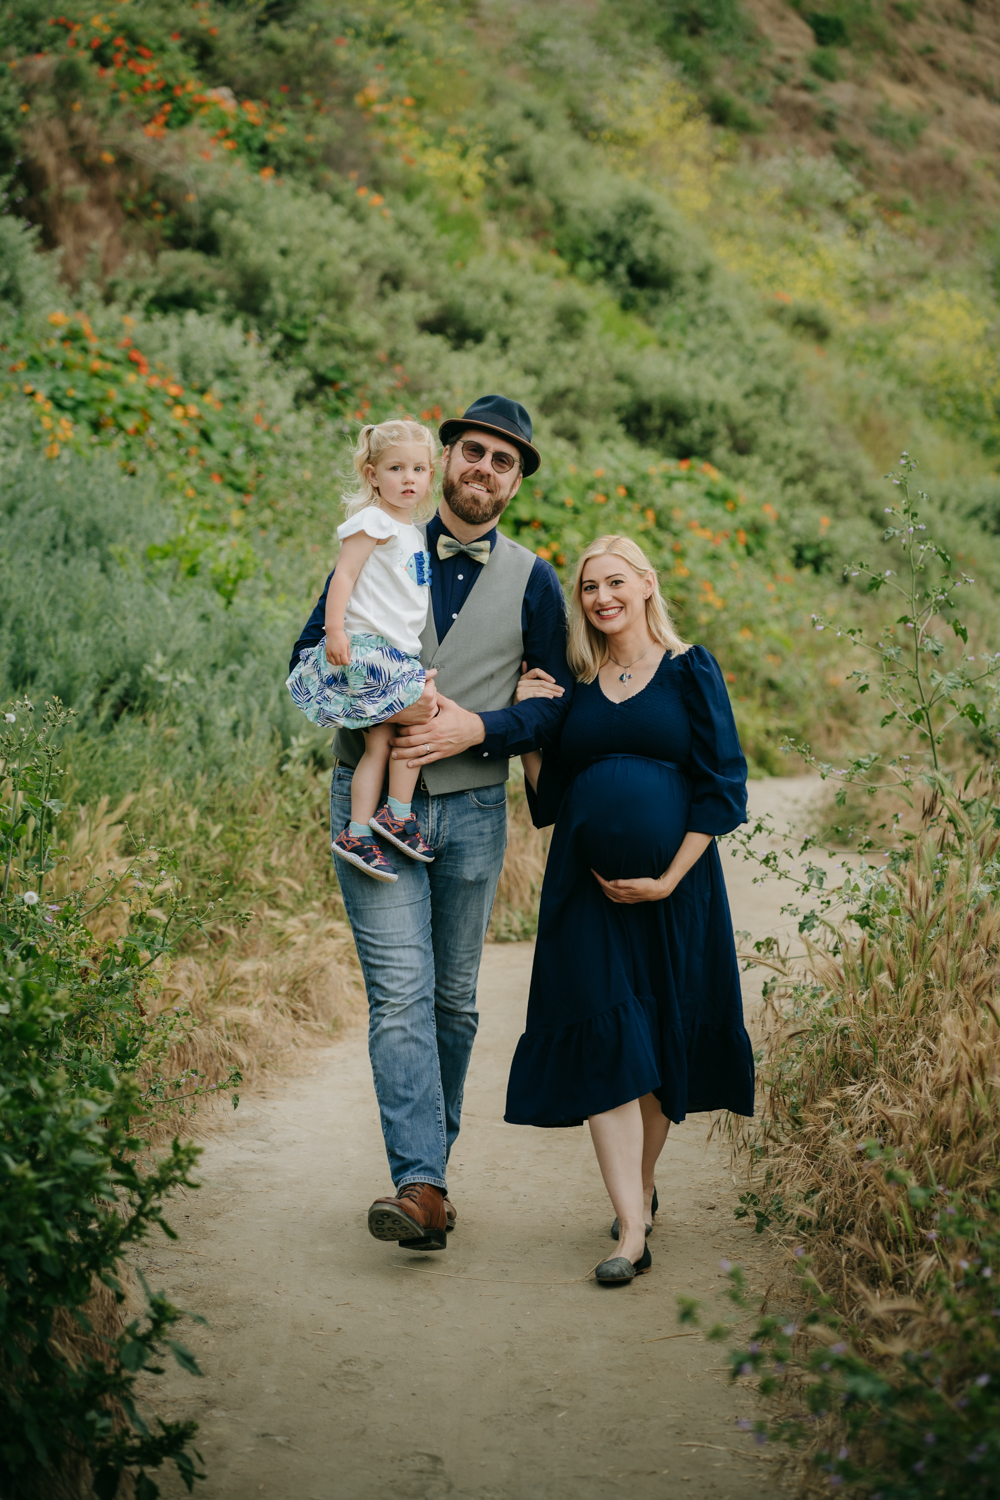 Maternity and Family Photoshoot in Palos Verdes, California